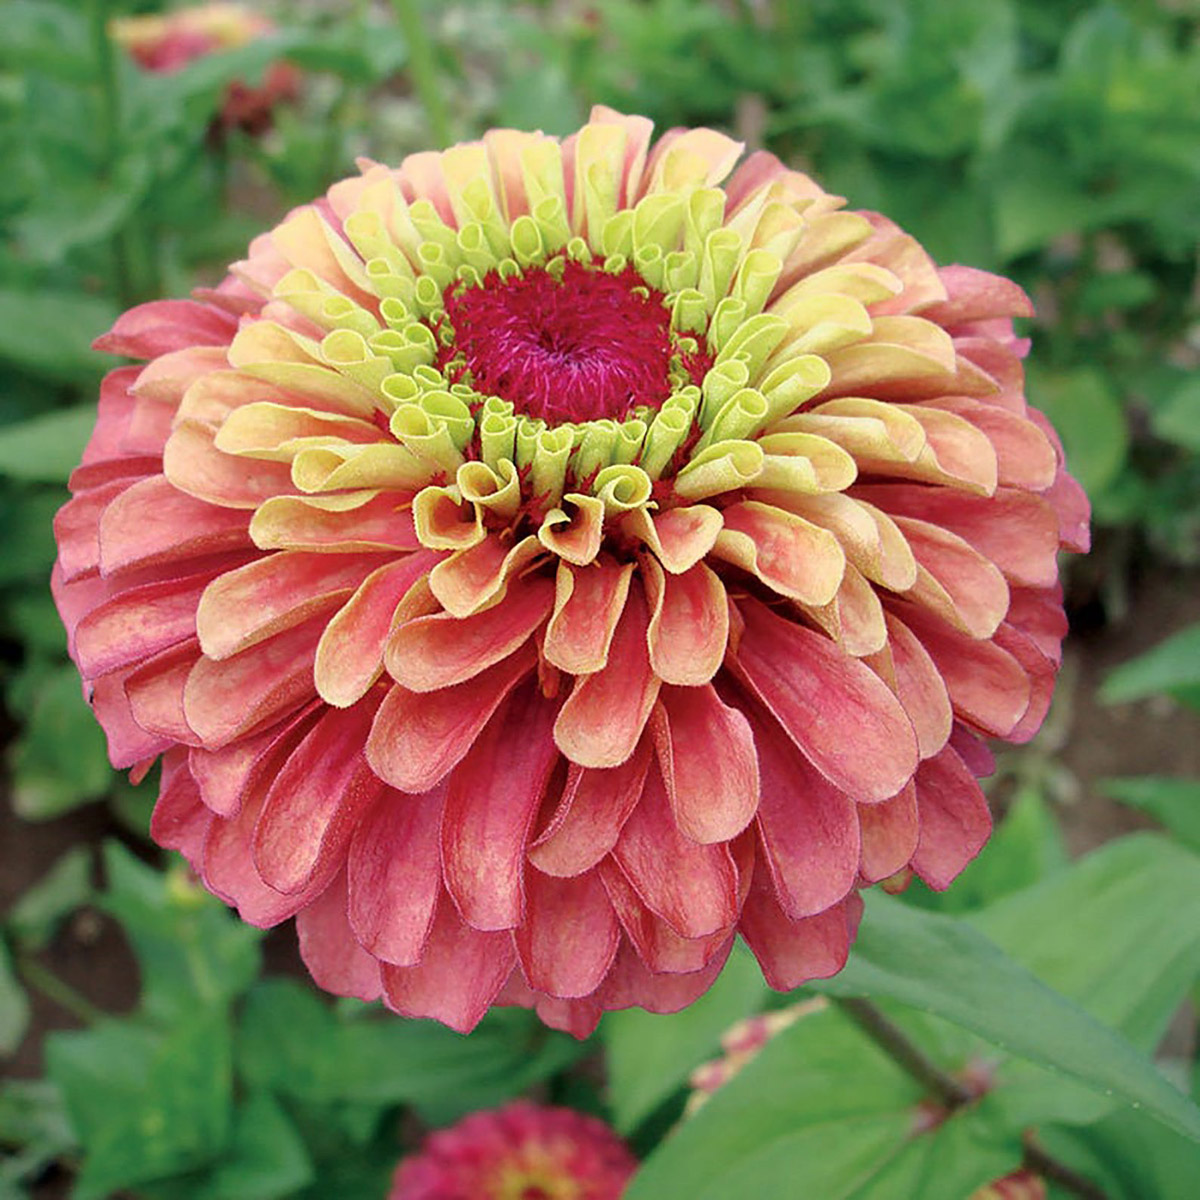 Queen Red Lime Zinnia - Available on Etsy from ArcadiaSampleSeeds